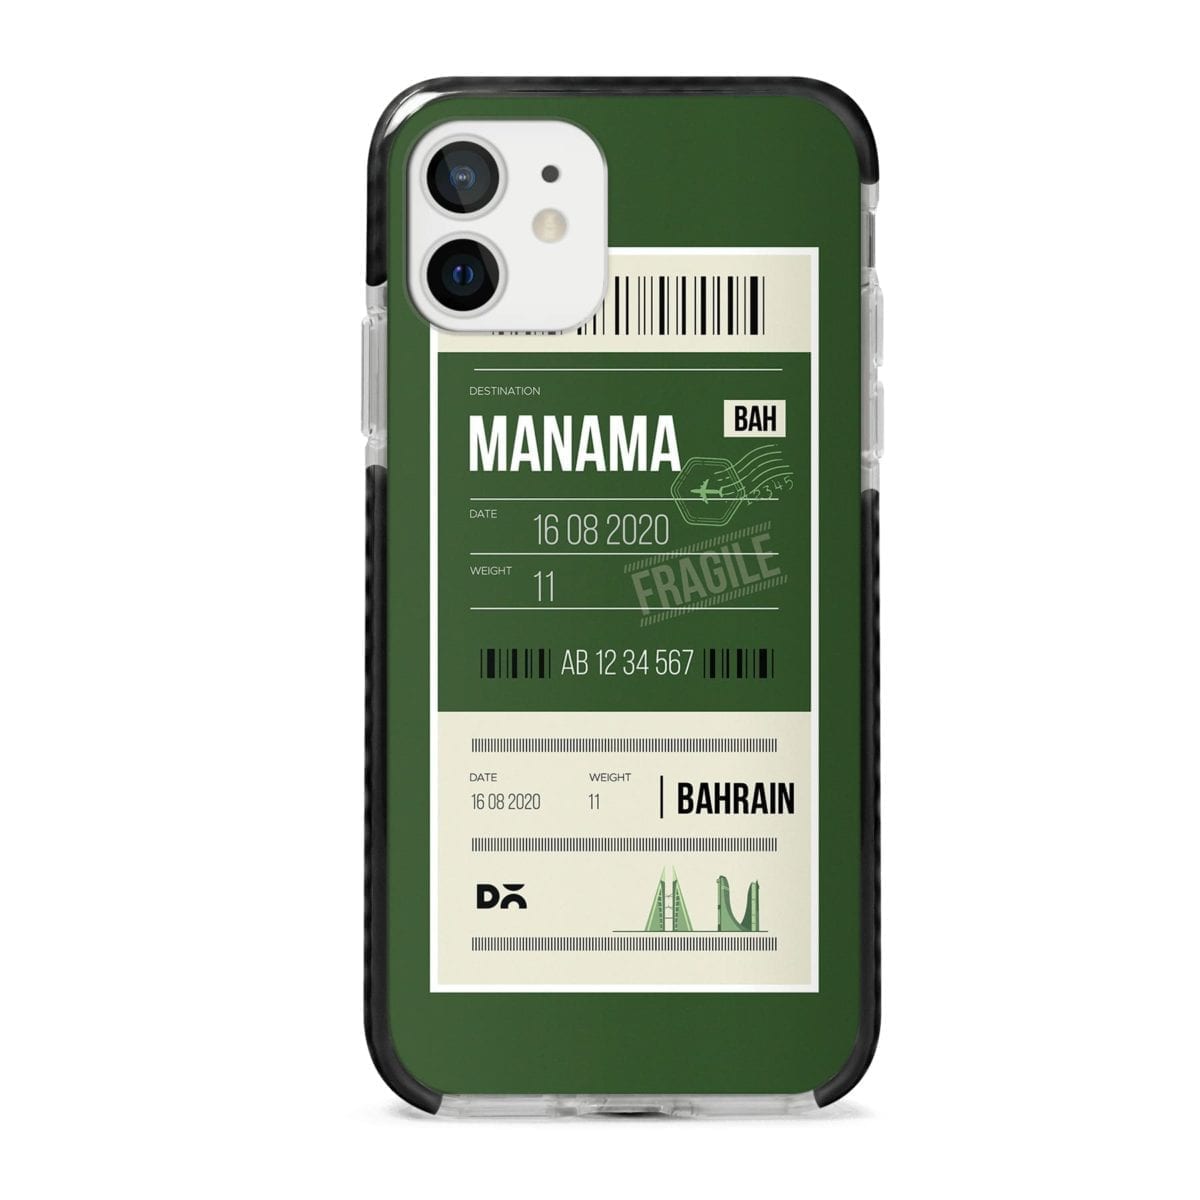 Manama Bahrain City Stride Case Cover for Apple iPhone 12 Mini and Apple iPhone 12 with great design and shock proof | Klippik | Online Shopping | Kuwait UAE Saudi